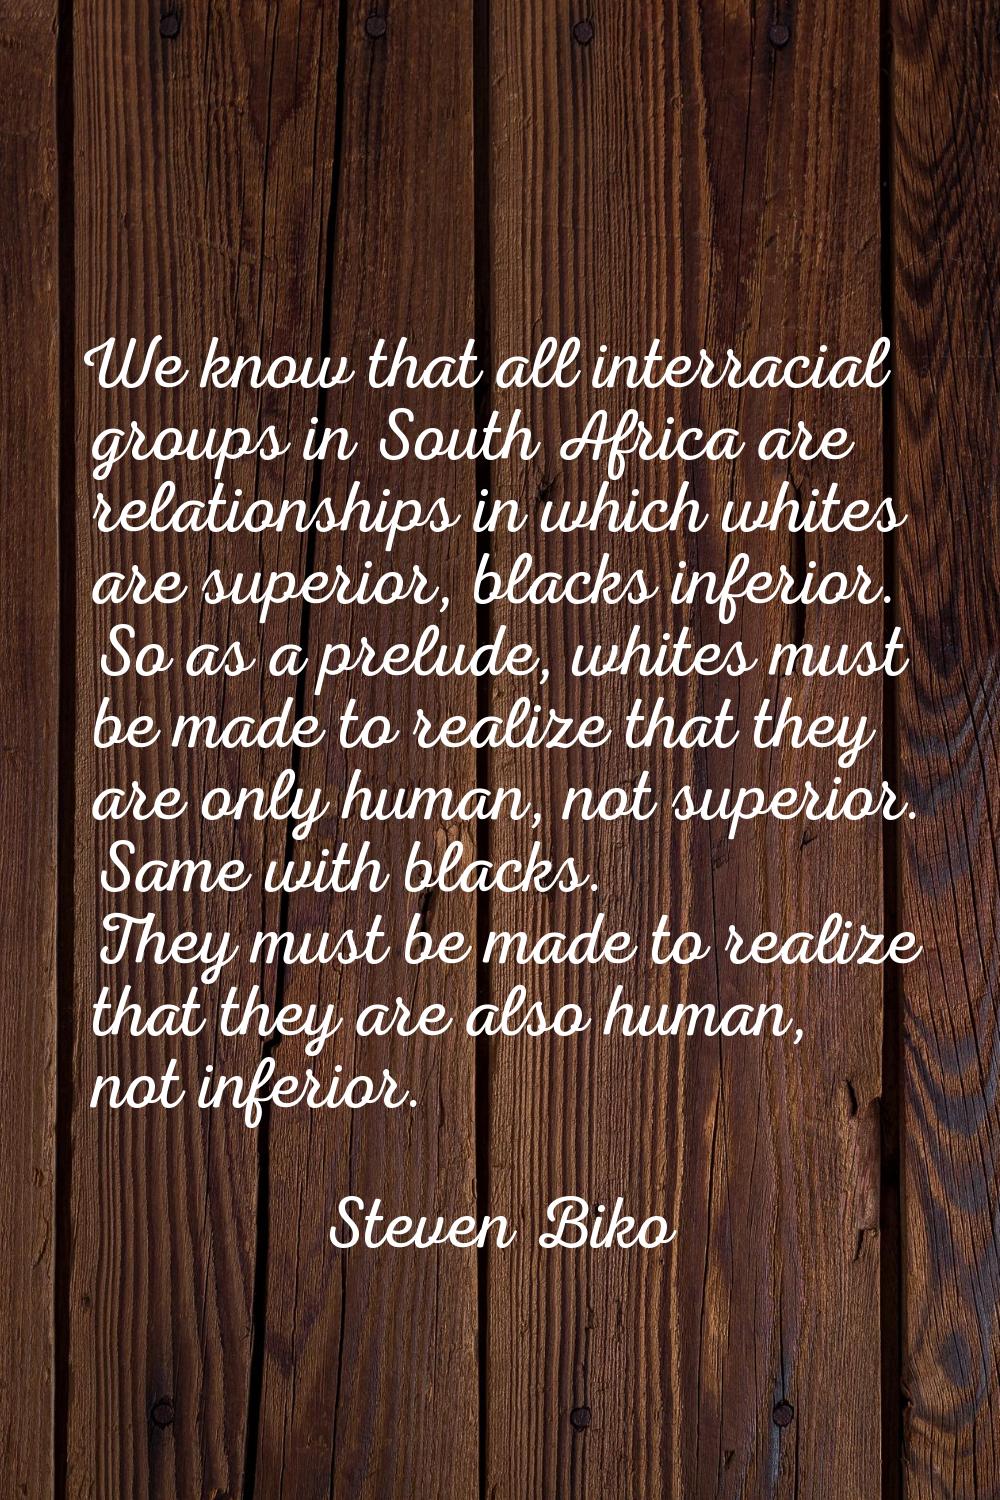 We know that all interracial groups in South Africa are relationships in which whites are superior,